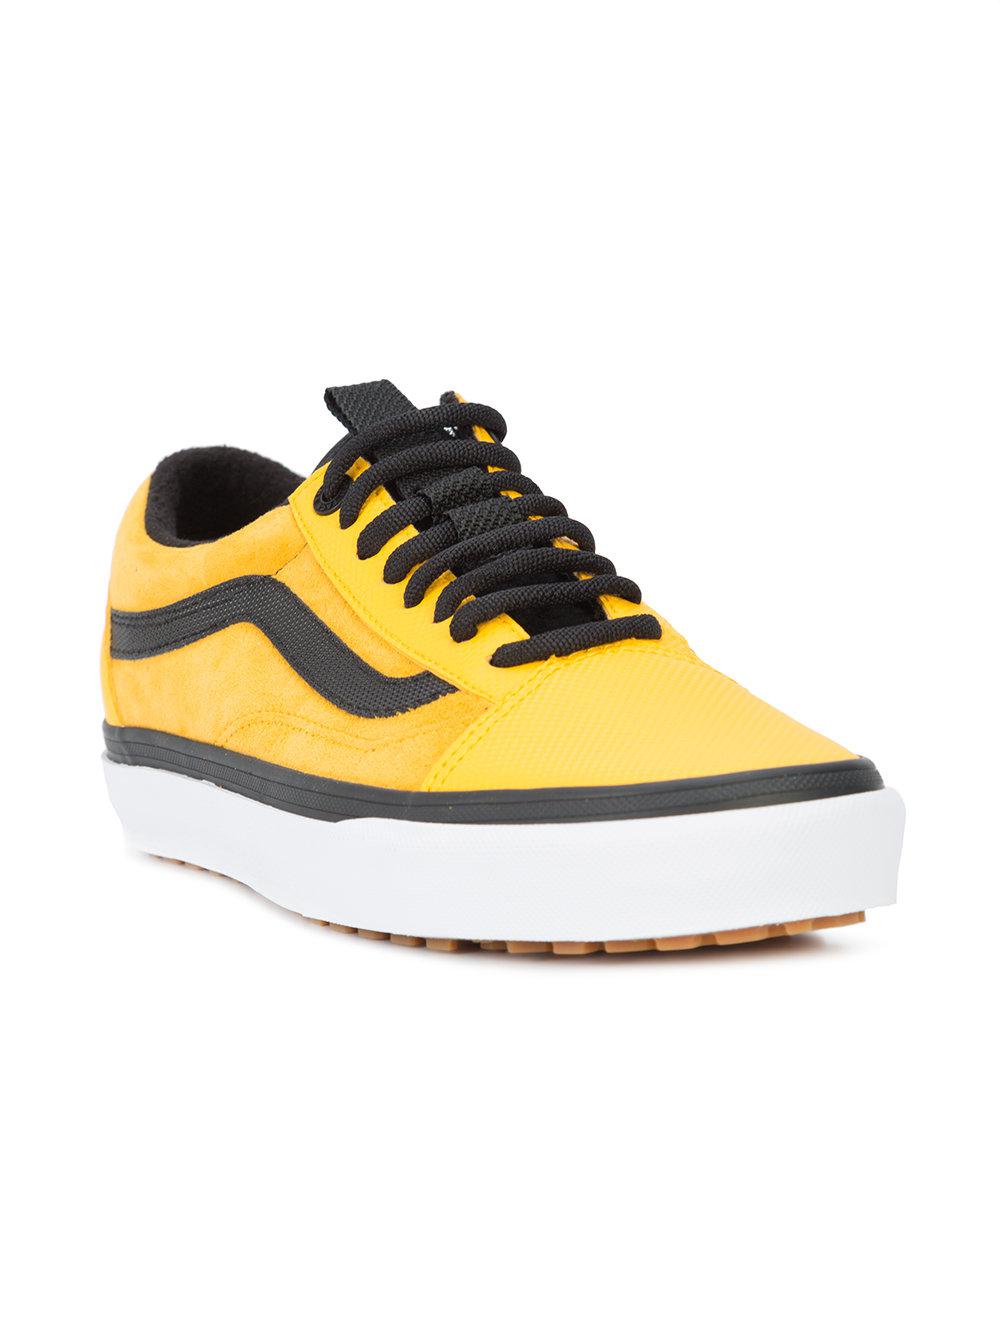 Vans Synthetic X The North Face Old Skool Mte Dx Sneakers in Yellow &  Orange (Yellow) for Men - Lyst